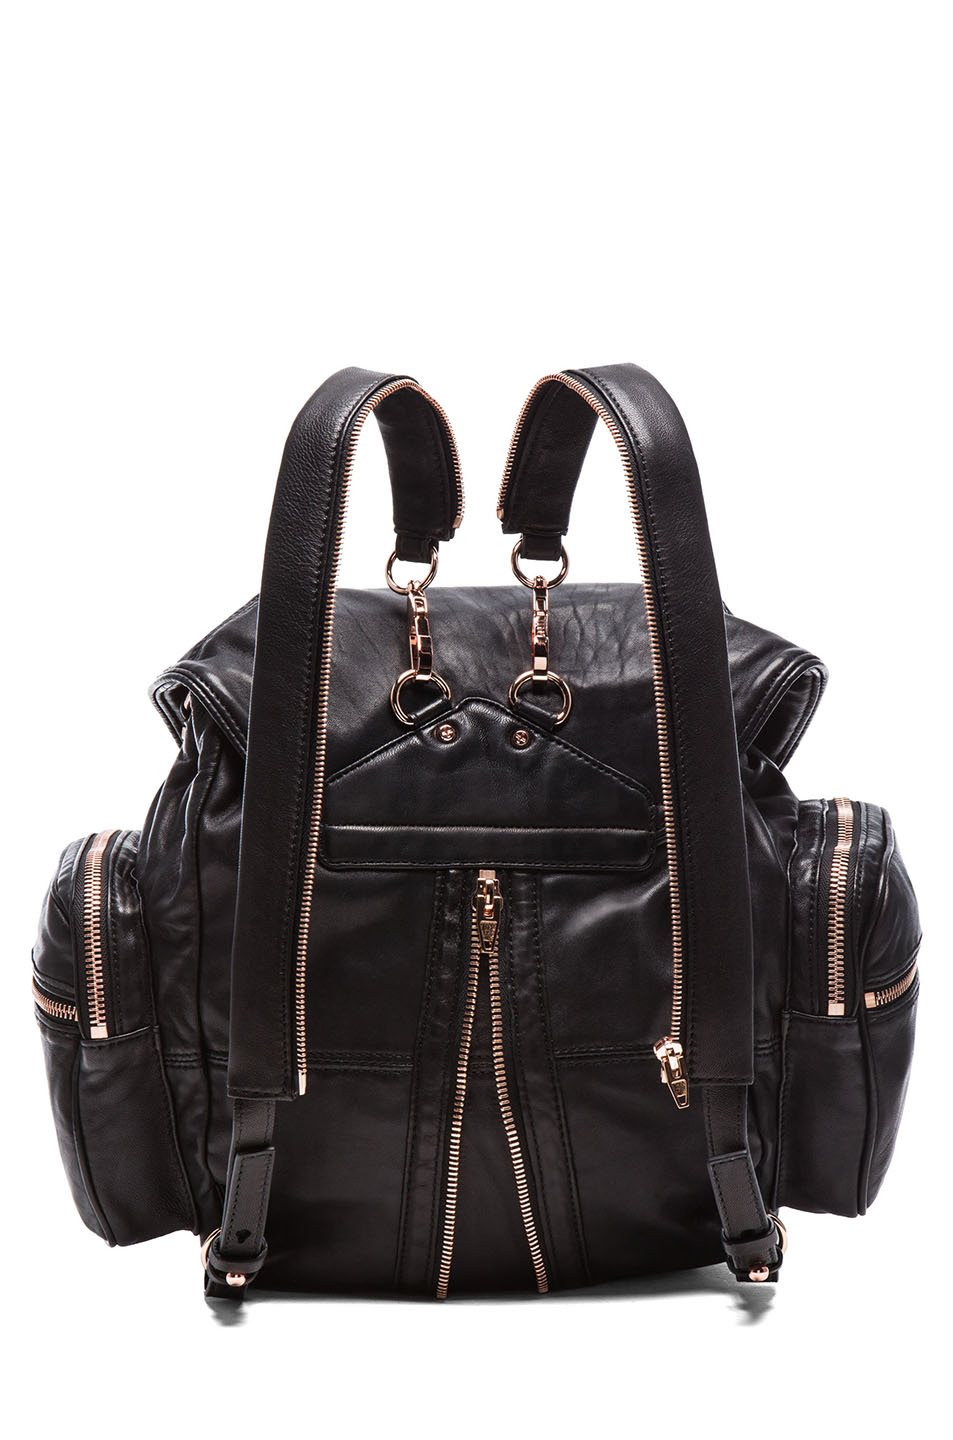 Alexander Wang Leather Marti Backpack with Rose Gold Hardware in Black - Lyst